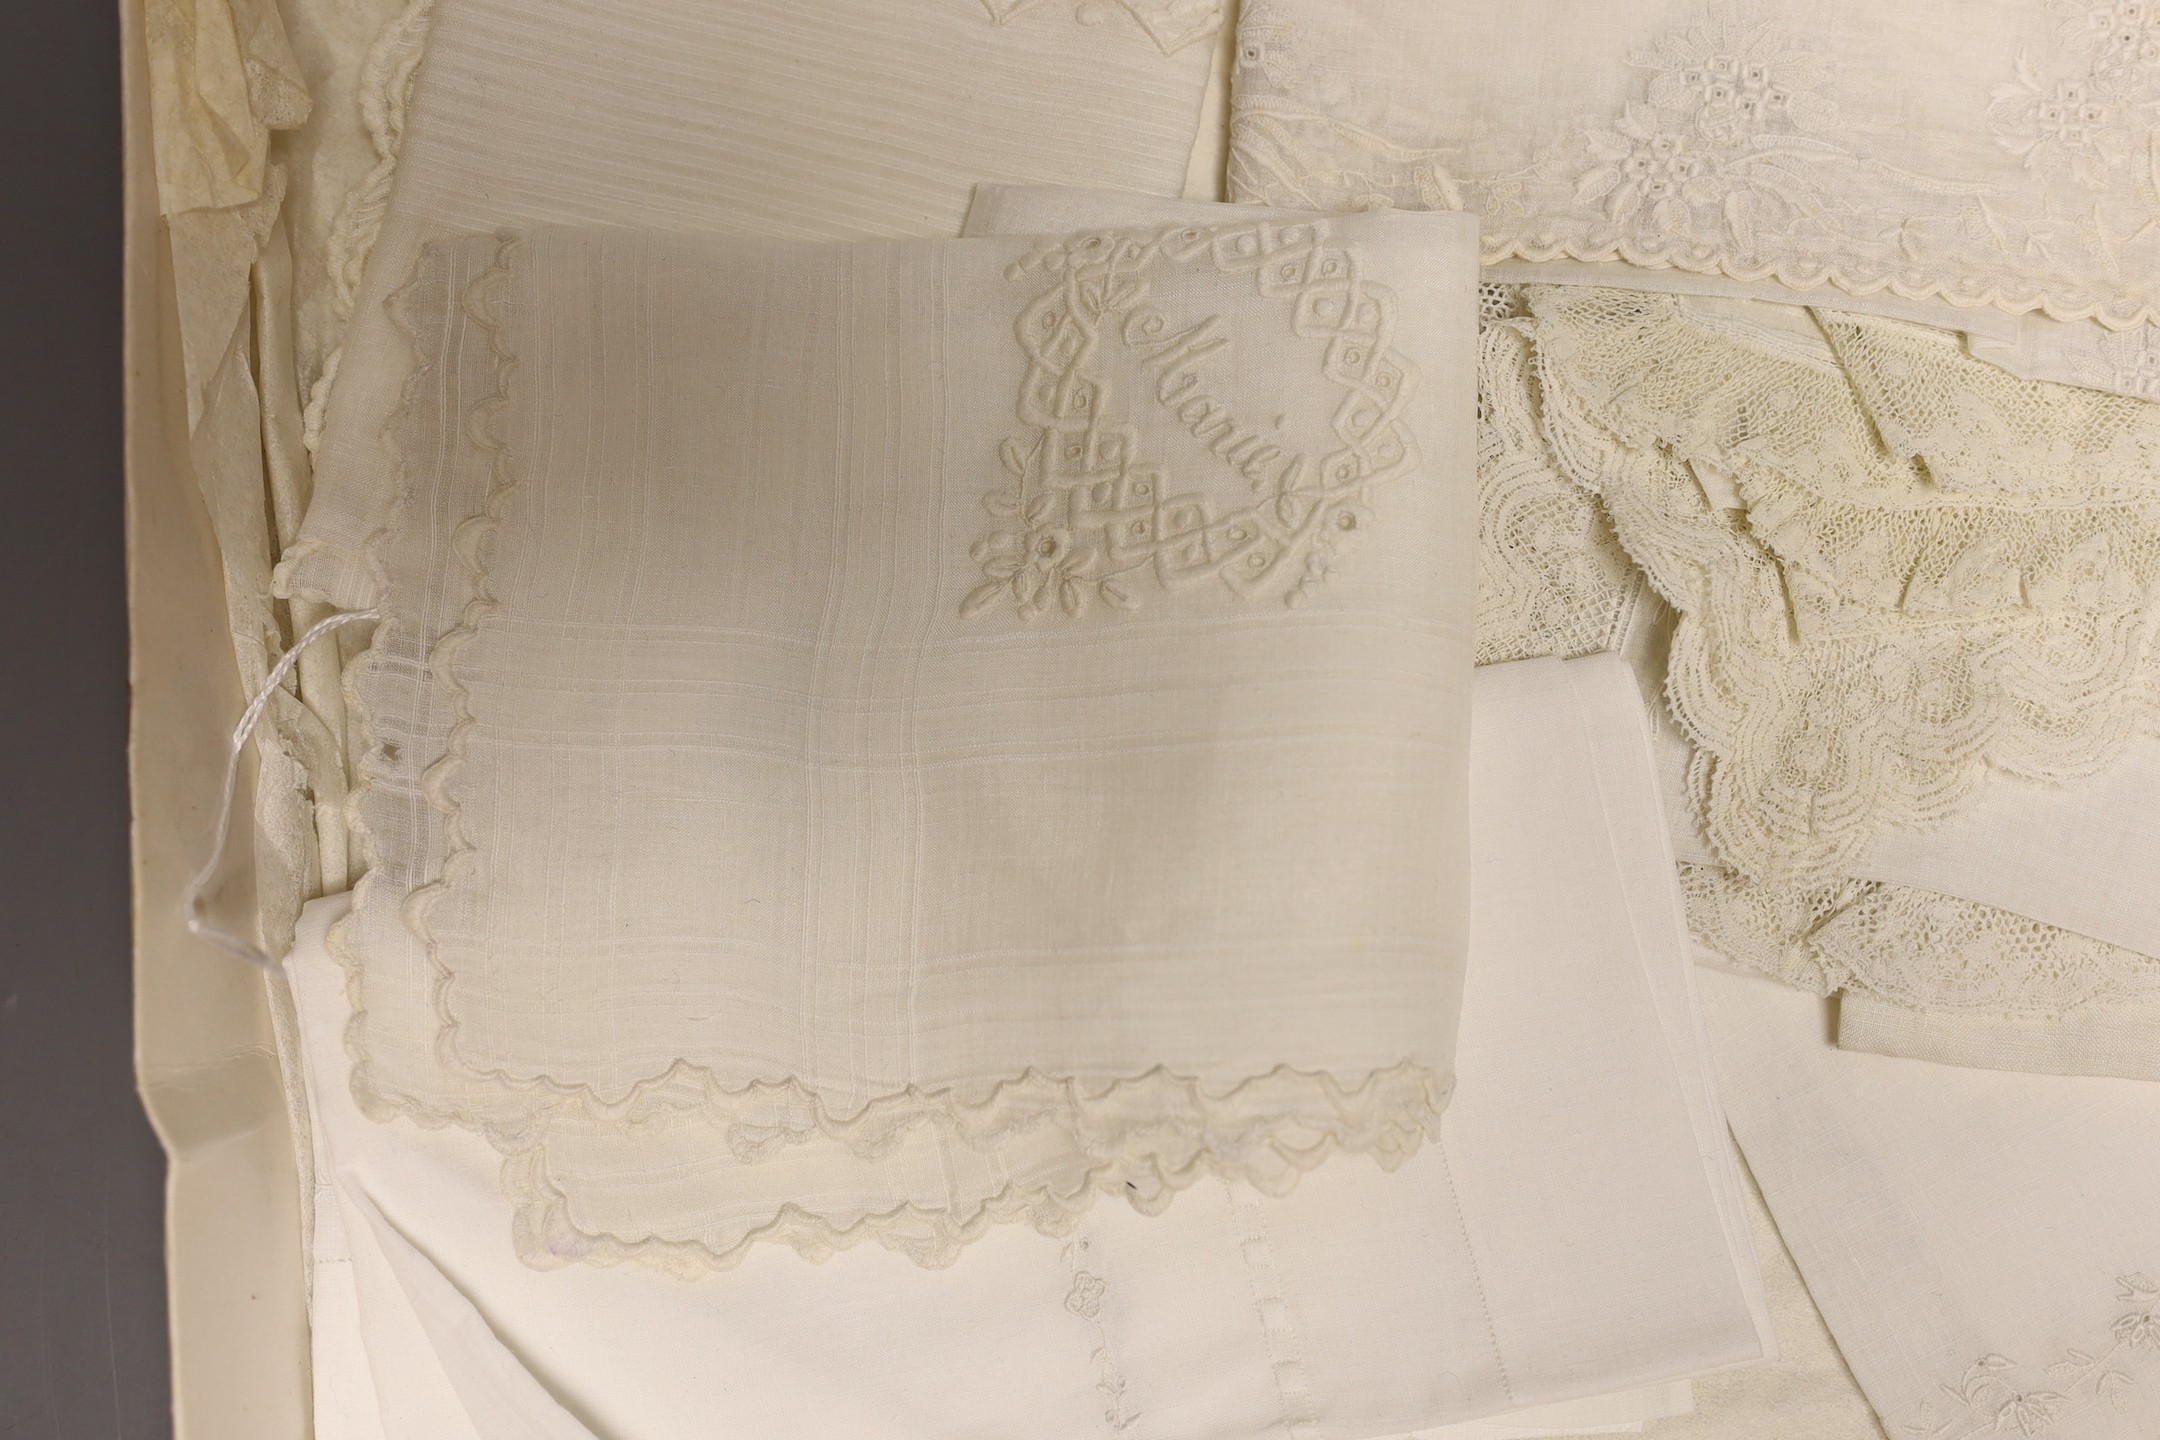 Ten mixed mostly 19th century hand white worked, some lace edged, hankies